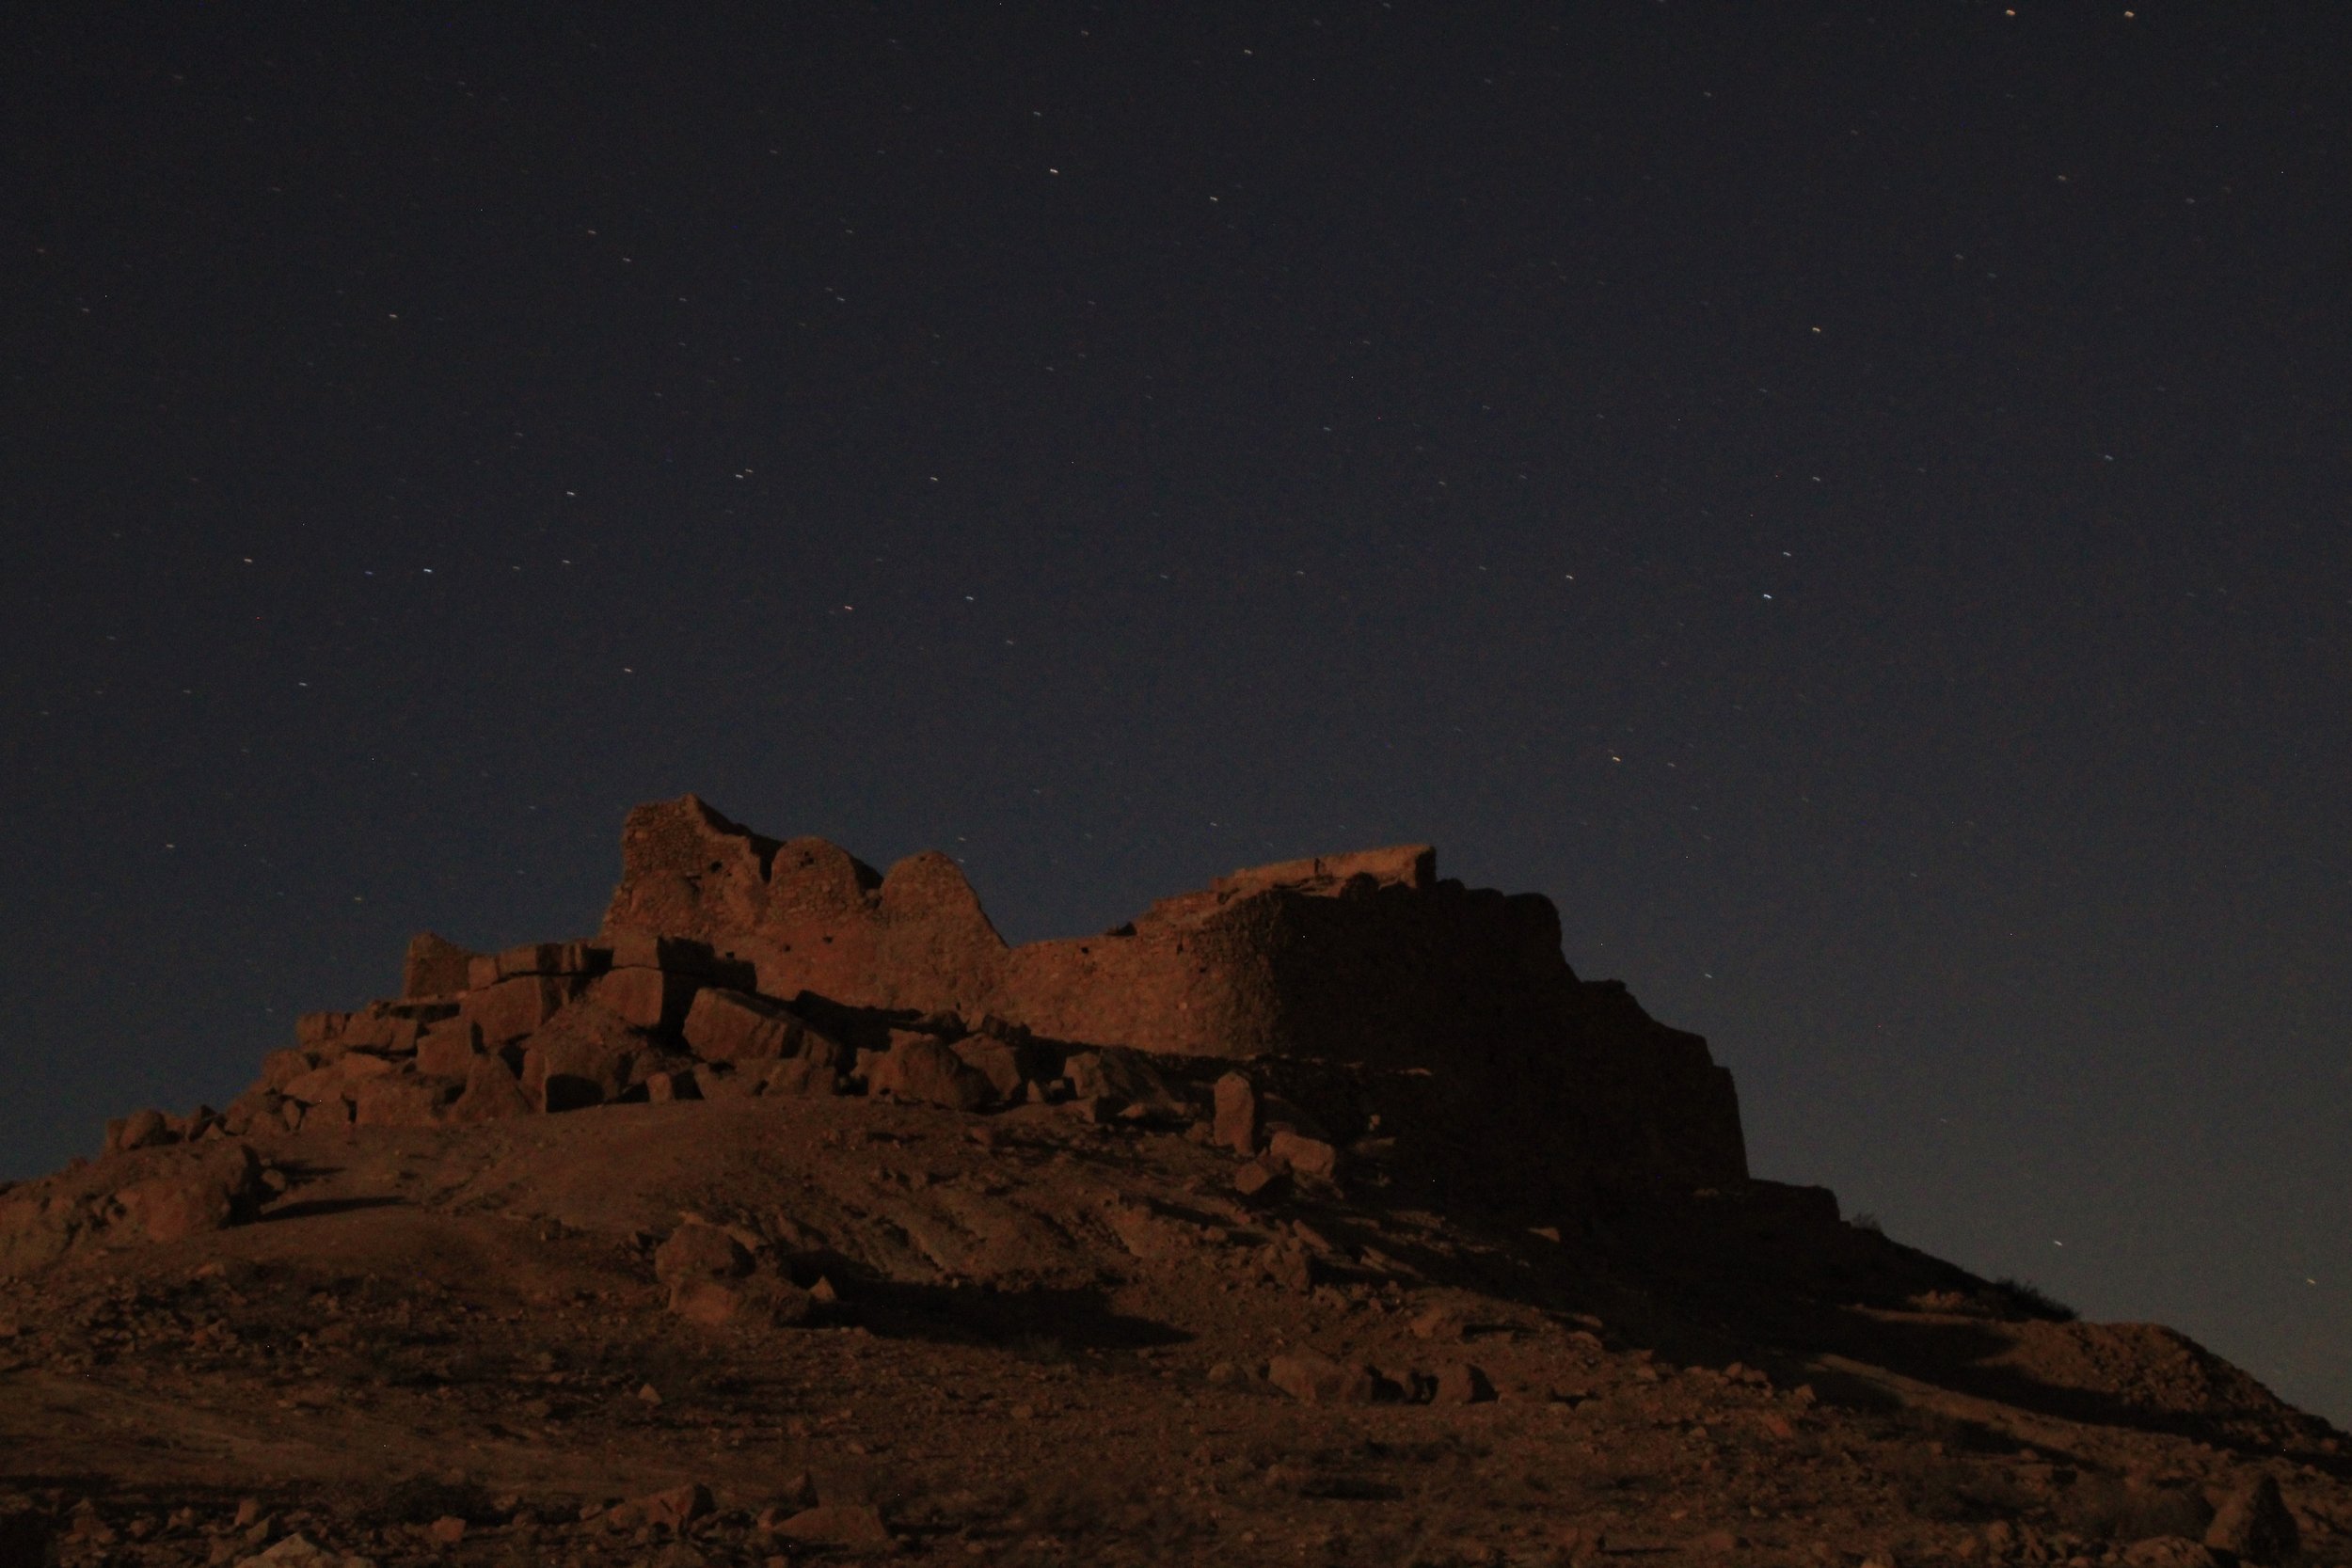  NOVEMBER 19th, 2022. PICTURED: A ksar lit up by the rising full moon. PC: Andrew Corbley © 